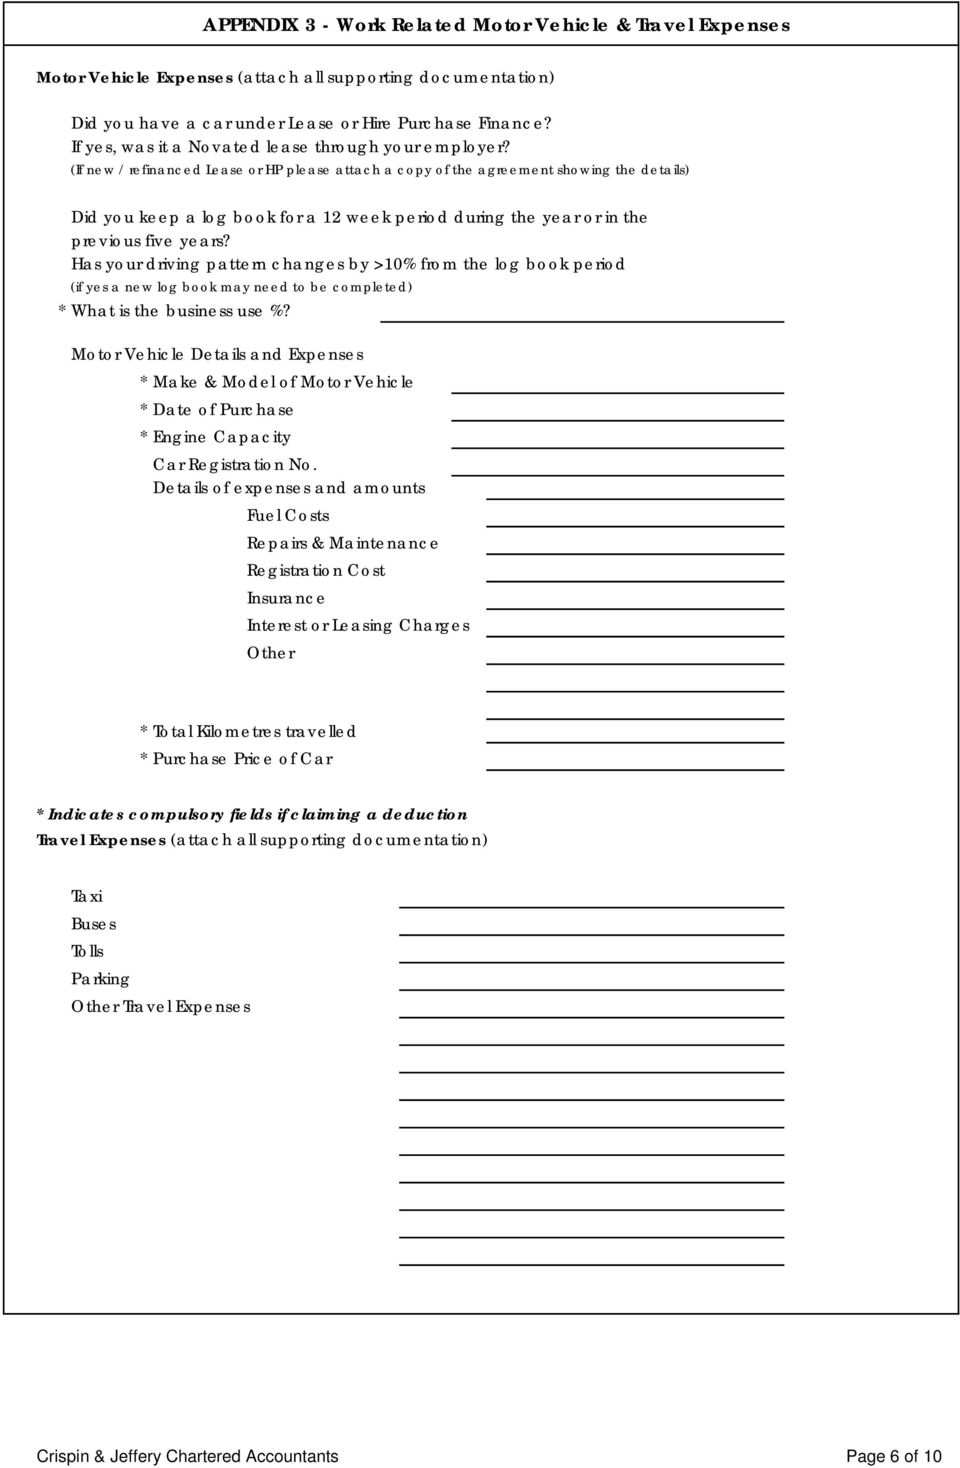 (If new / refinanced Lease or HP please attach a copy of the agreement showing the details) Did you keep a log book for a 12 week period during the year or in the previous five years?